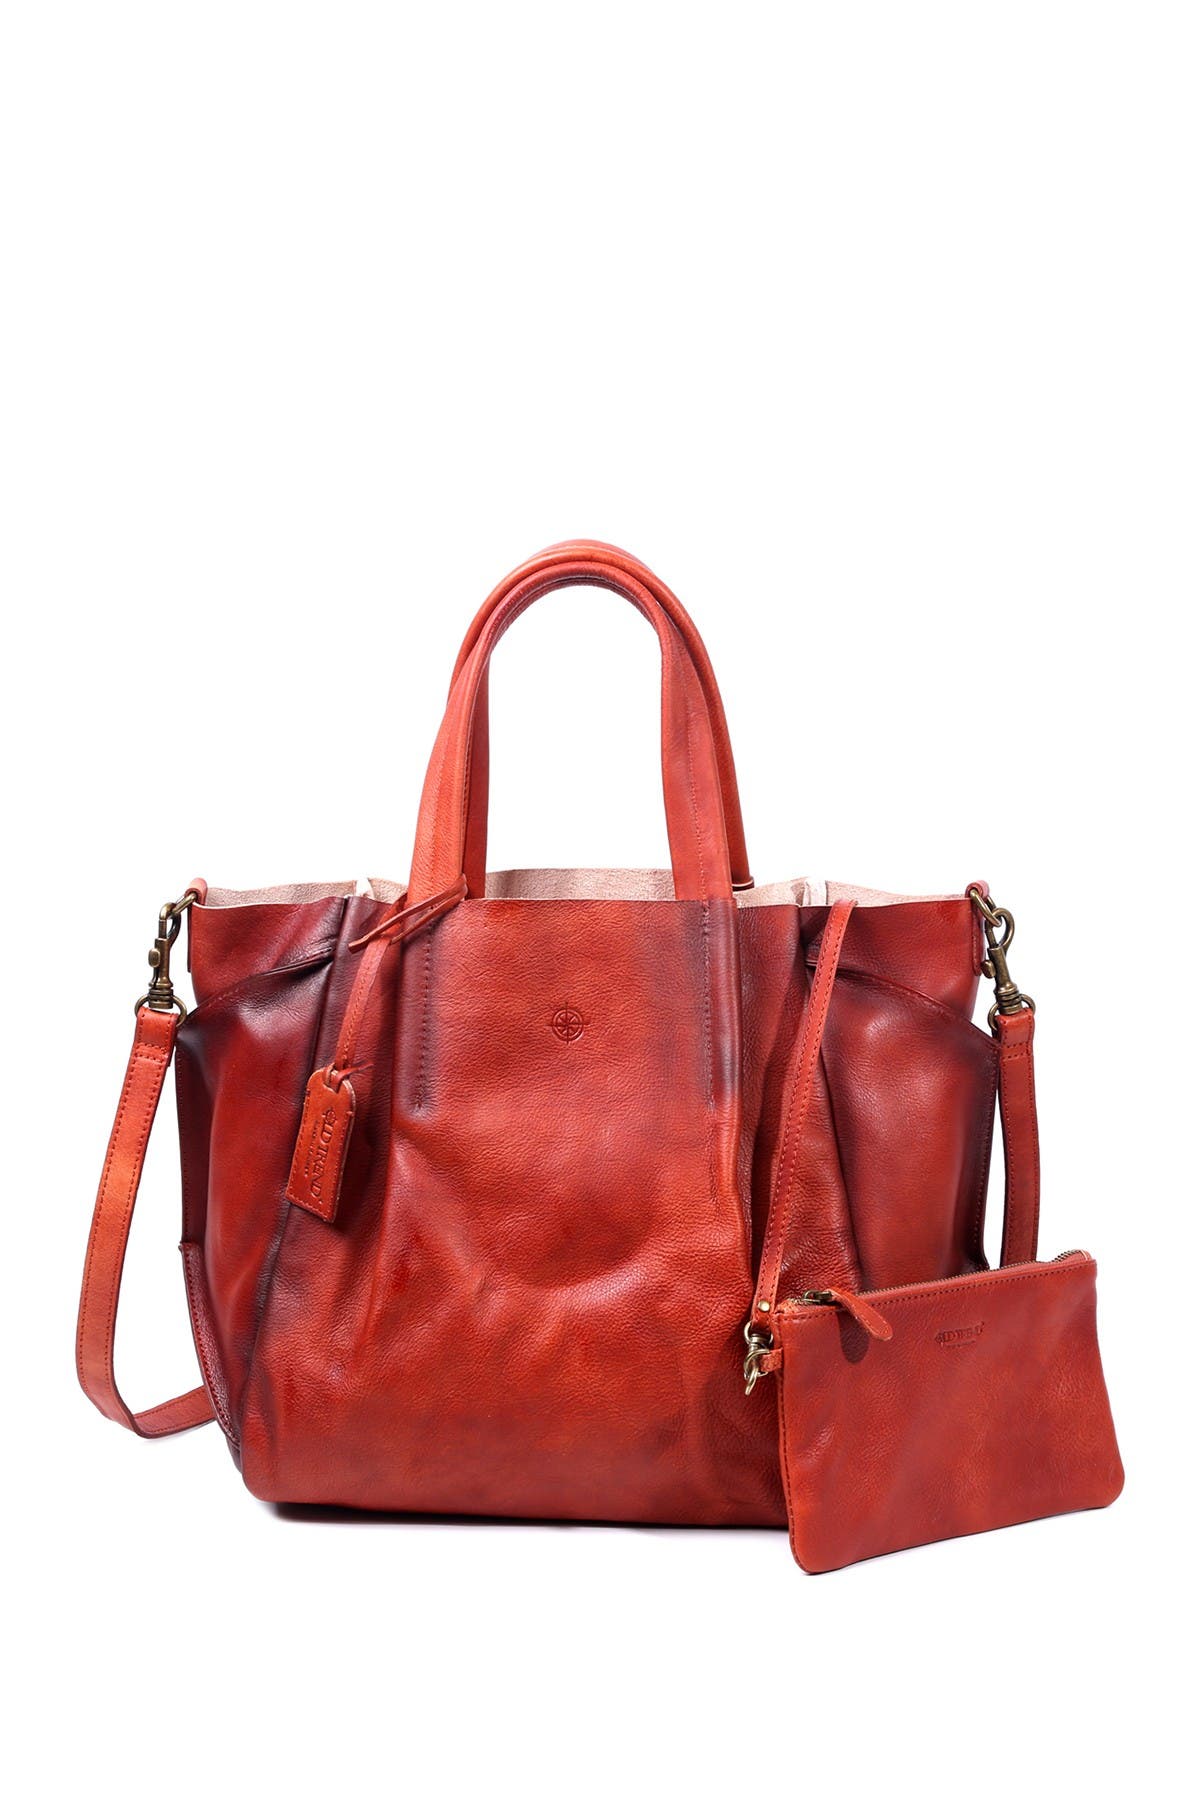 OLD TREND SPROUT LAND LEATHER TOTE BAG,852676969491